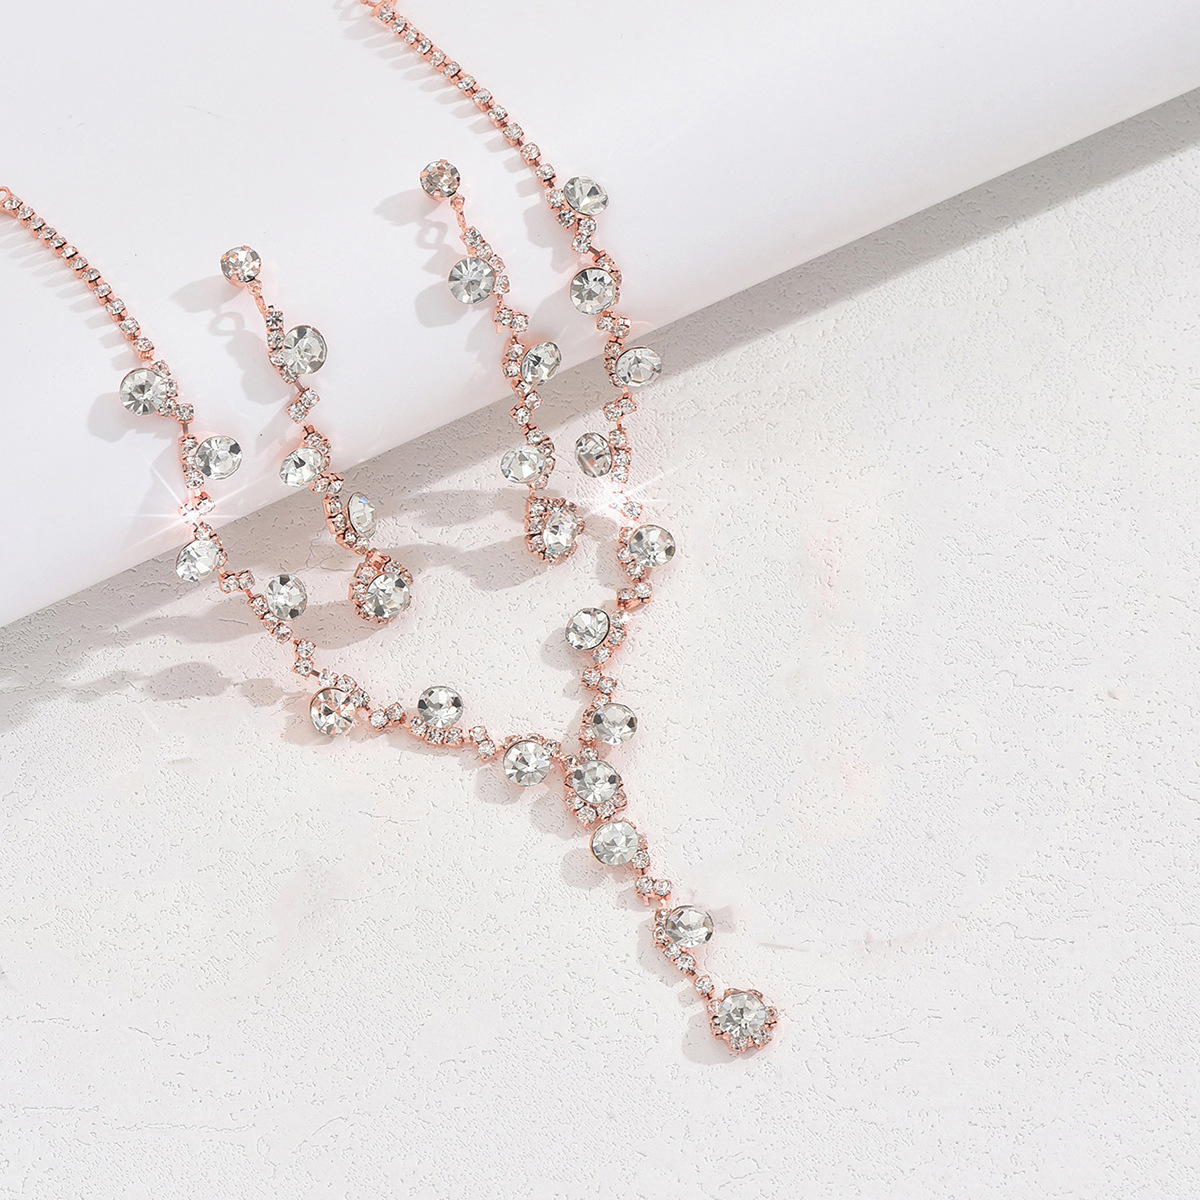 7:869 Necklace earrings rose gold set